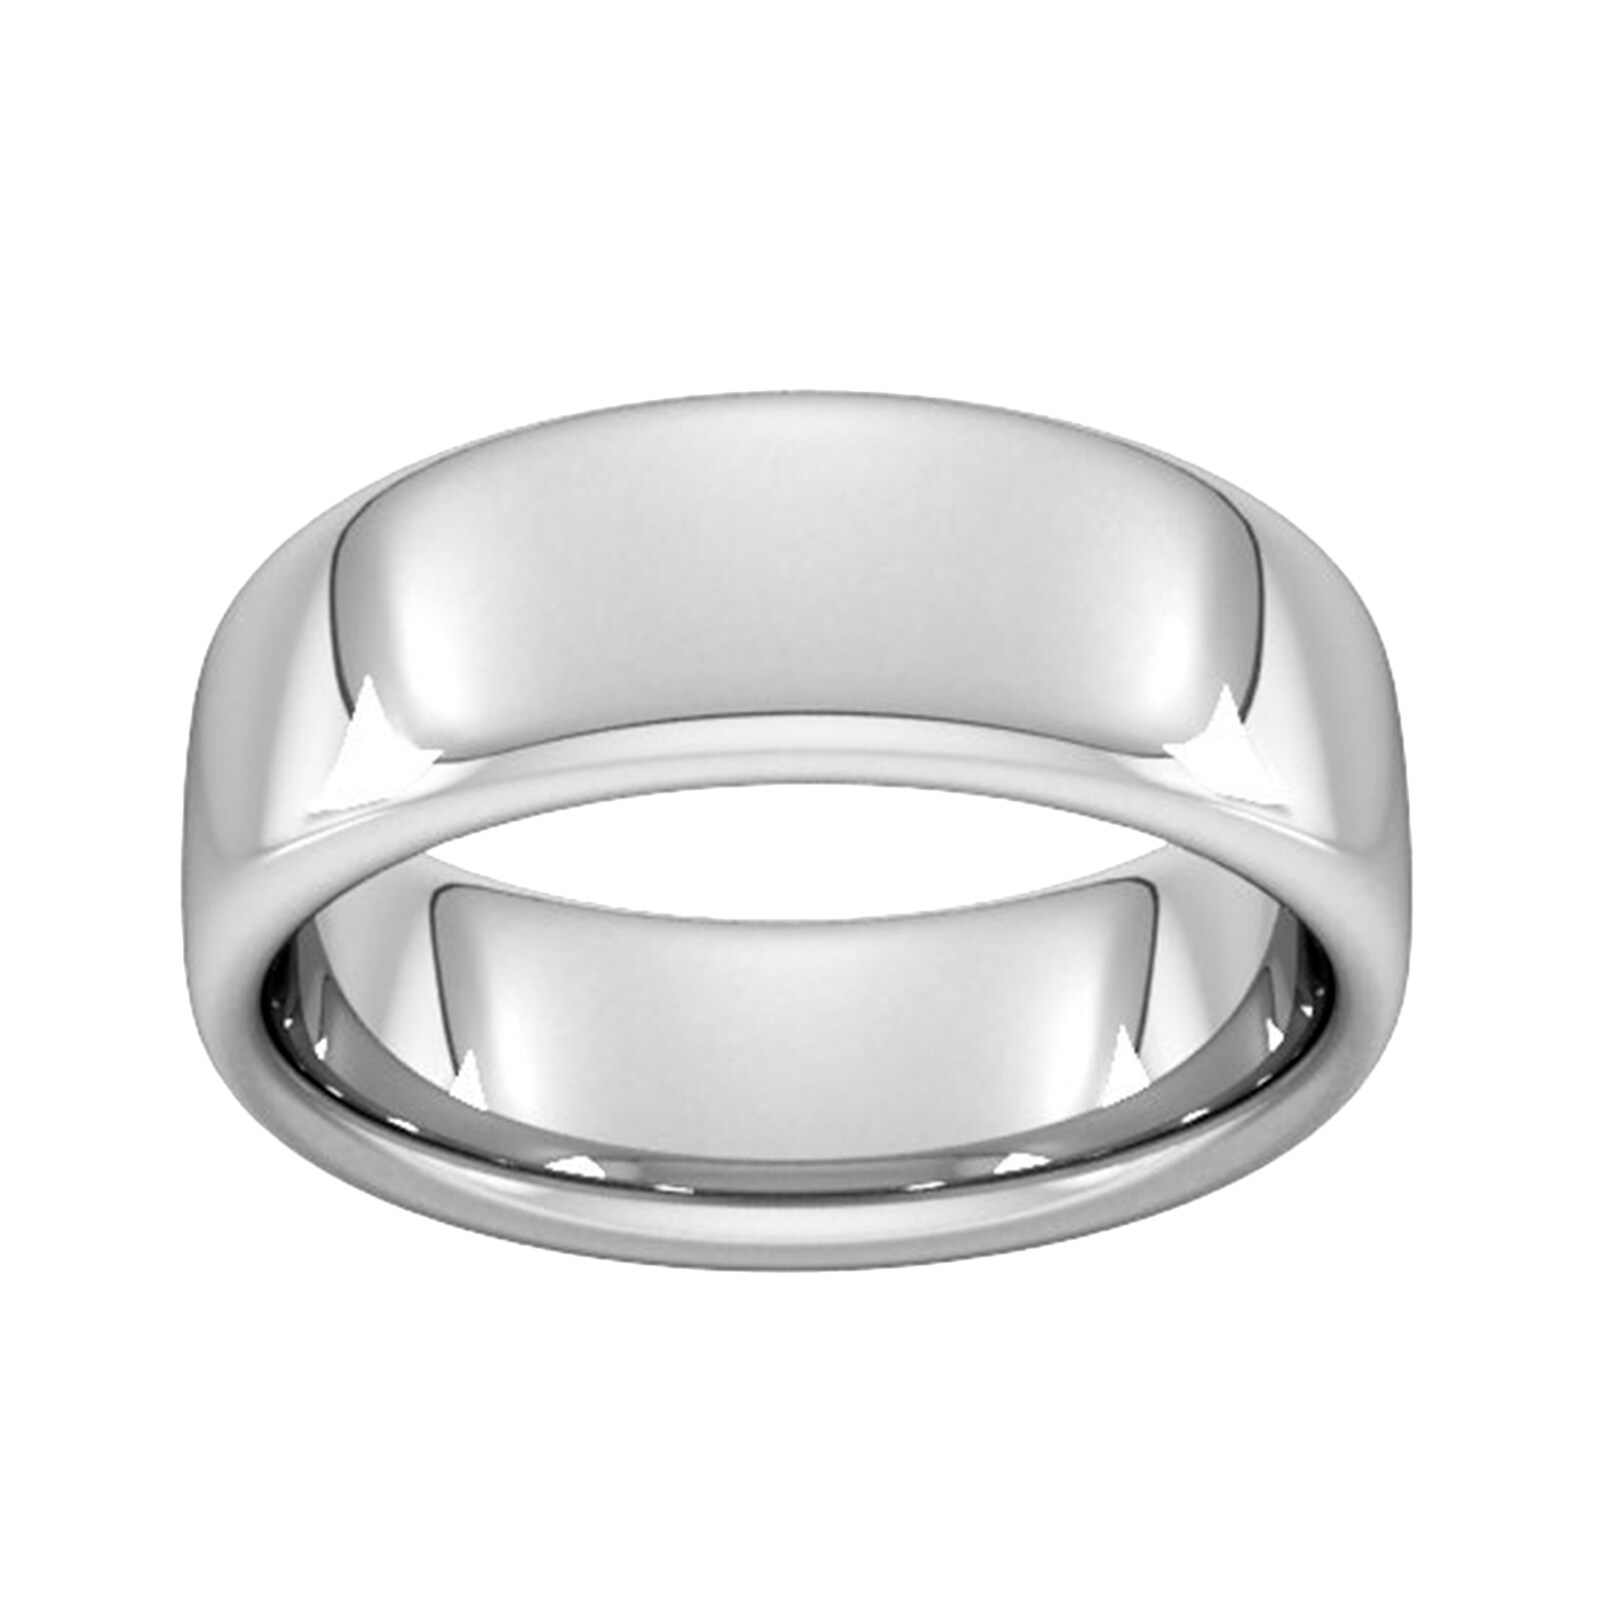 8mm Slight Court Extra Heavy Wedding Ring In 9 Carat White Gold - Ring Size K